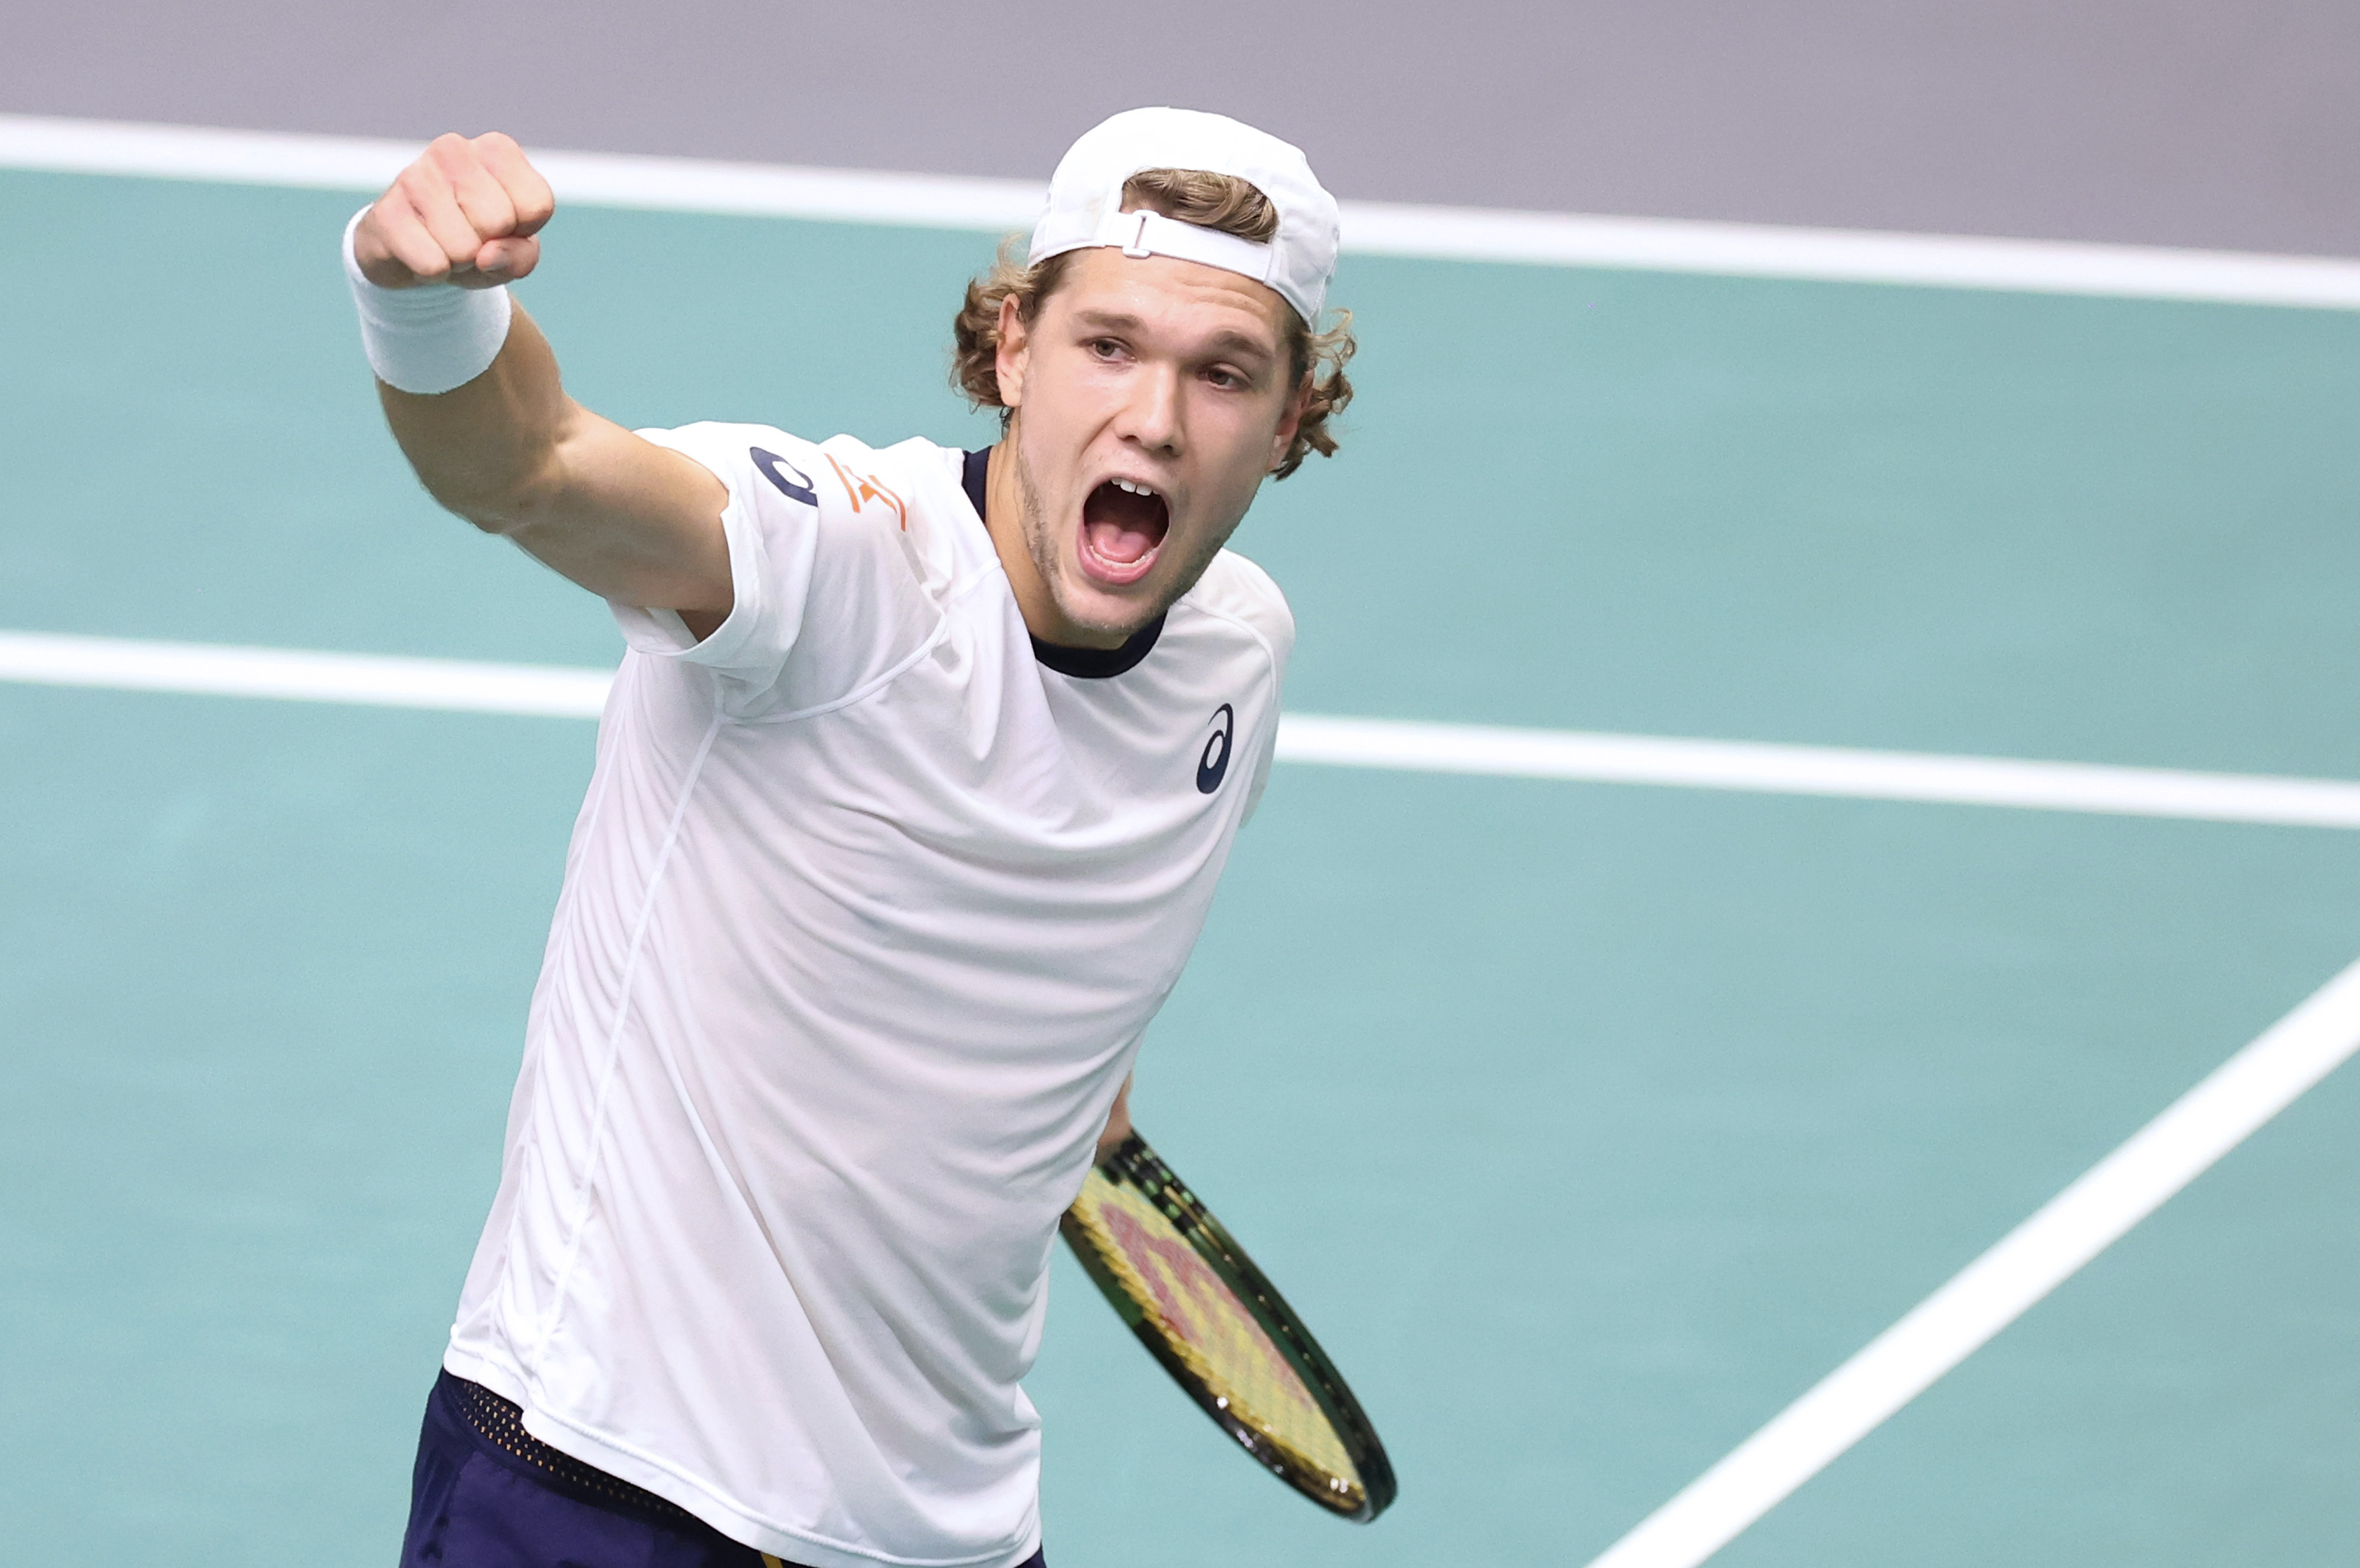 The Davis Cup, Refilled As Finland stuns U.S., national pride still rules